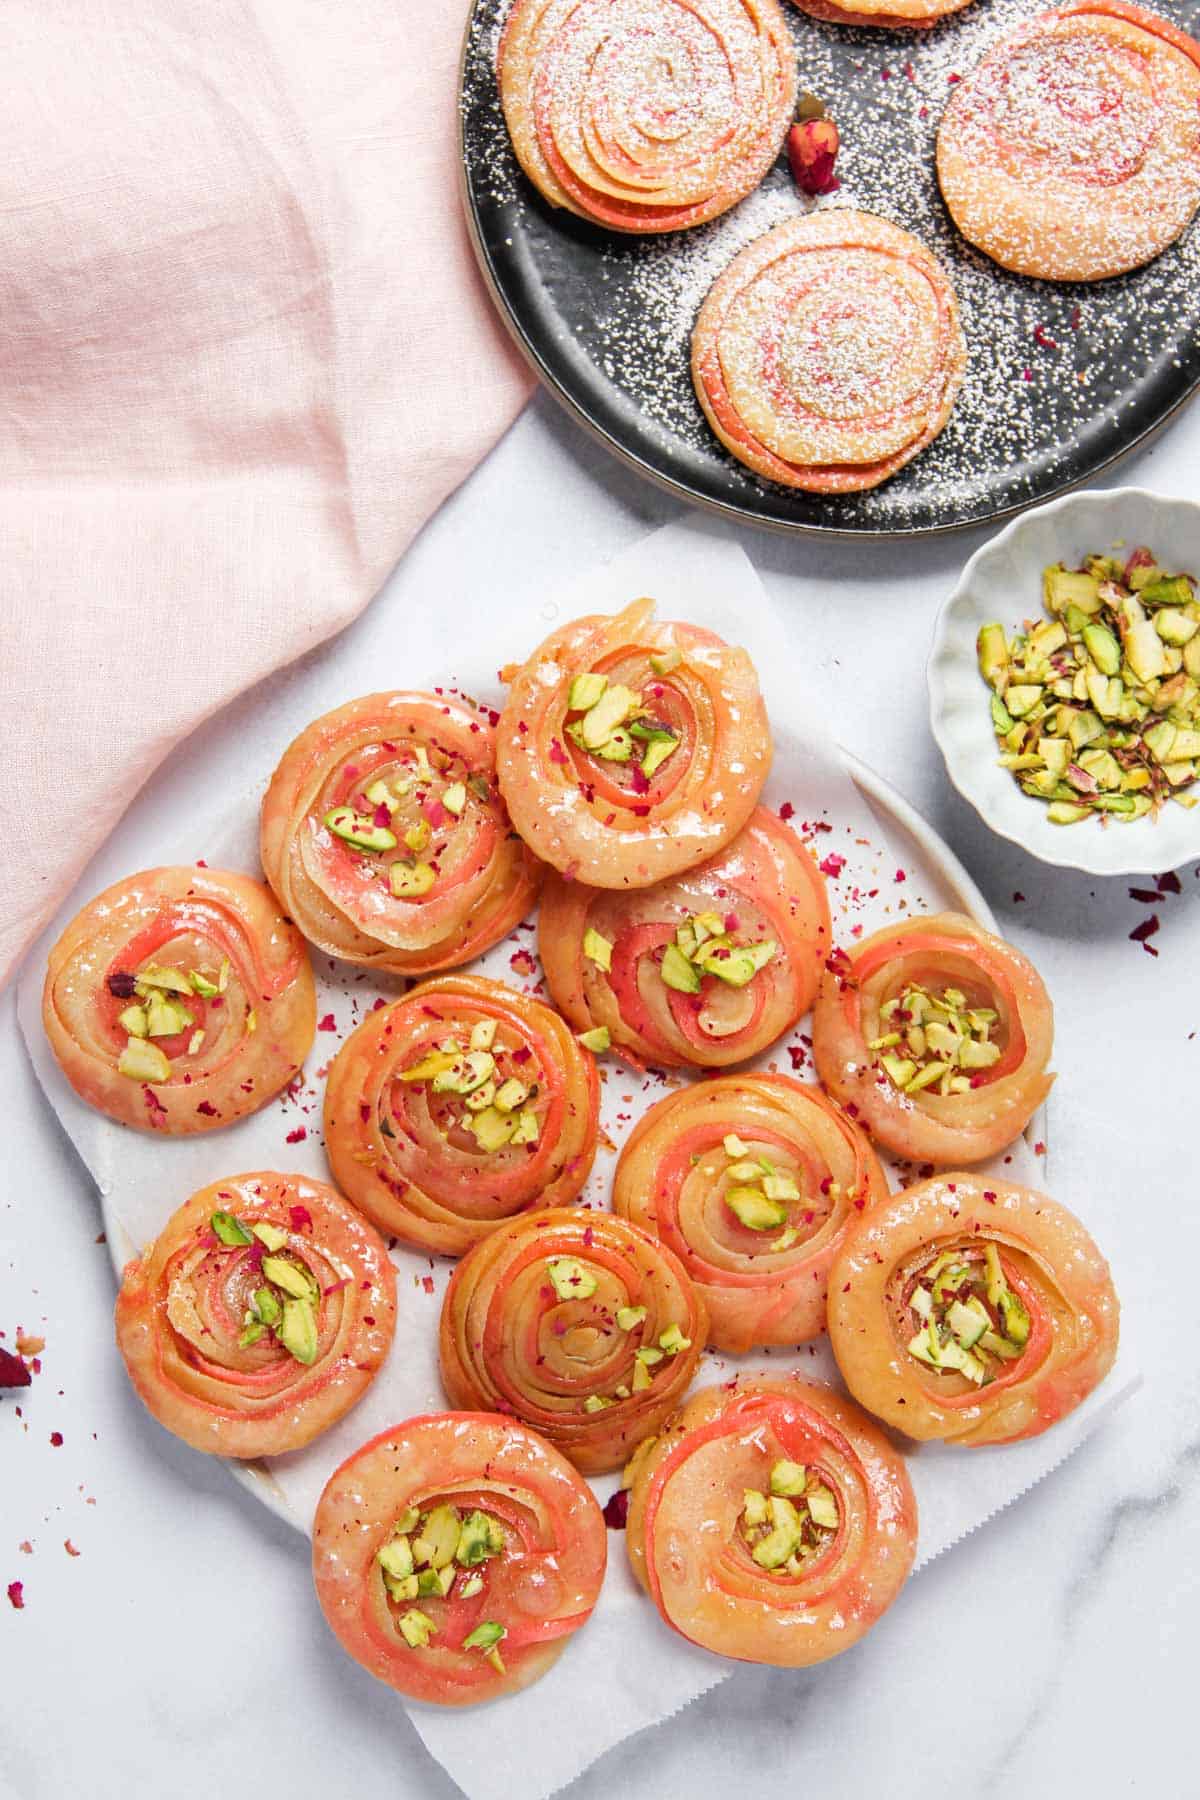 Chirote garnished with pistachios alongside chirote with powdered sugar